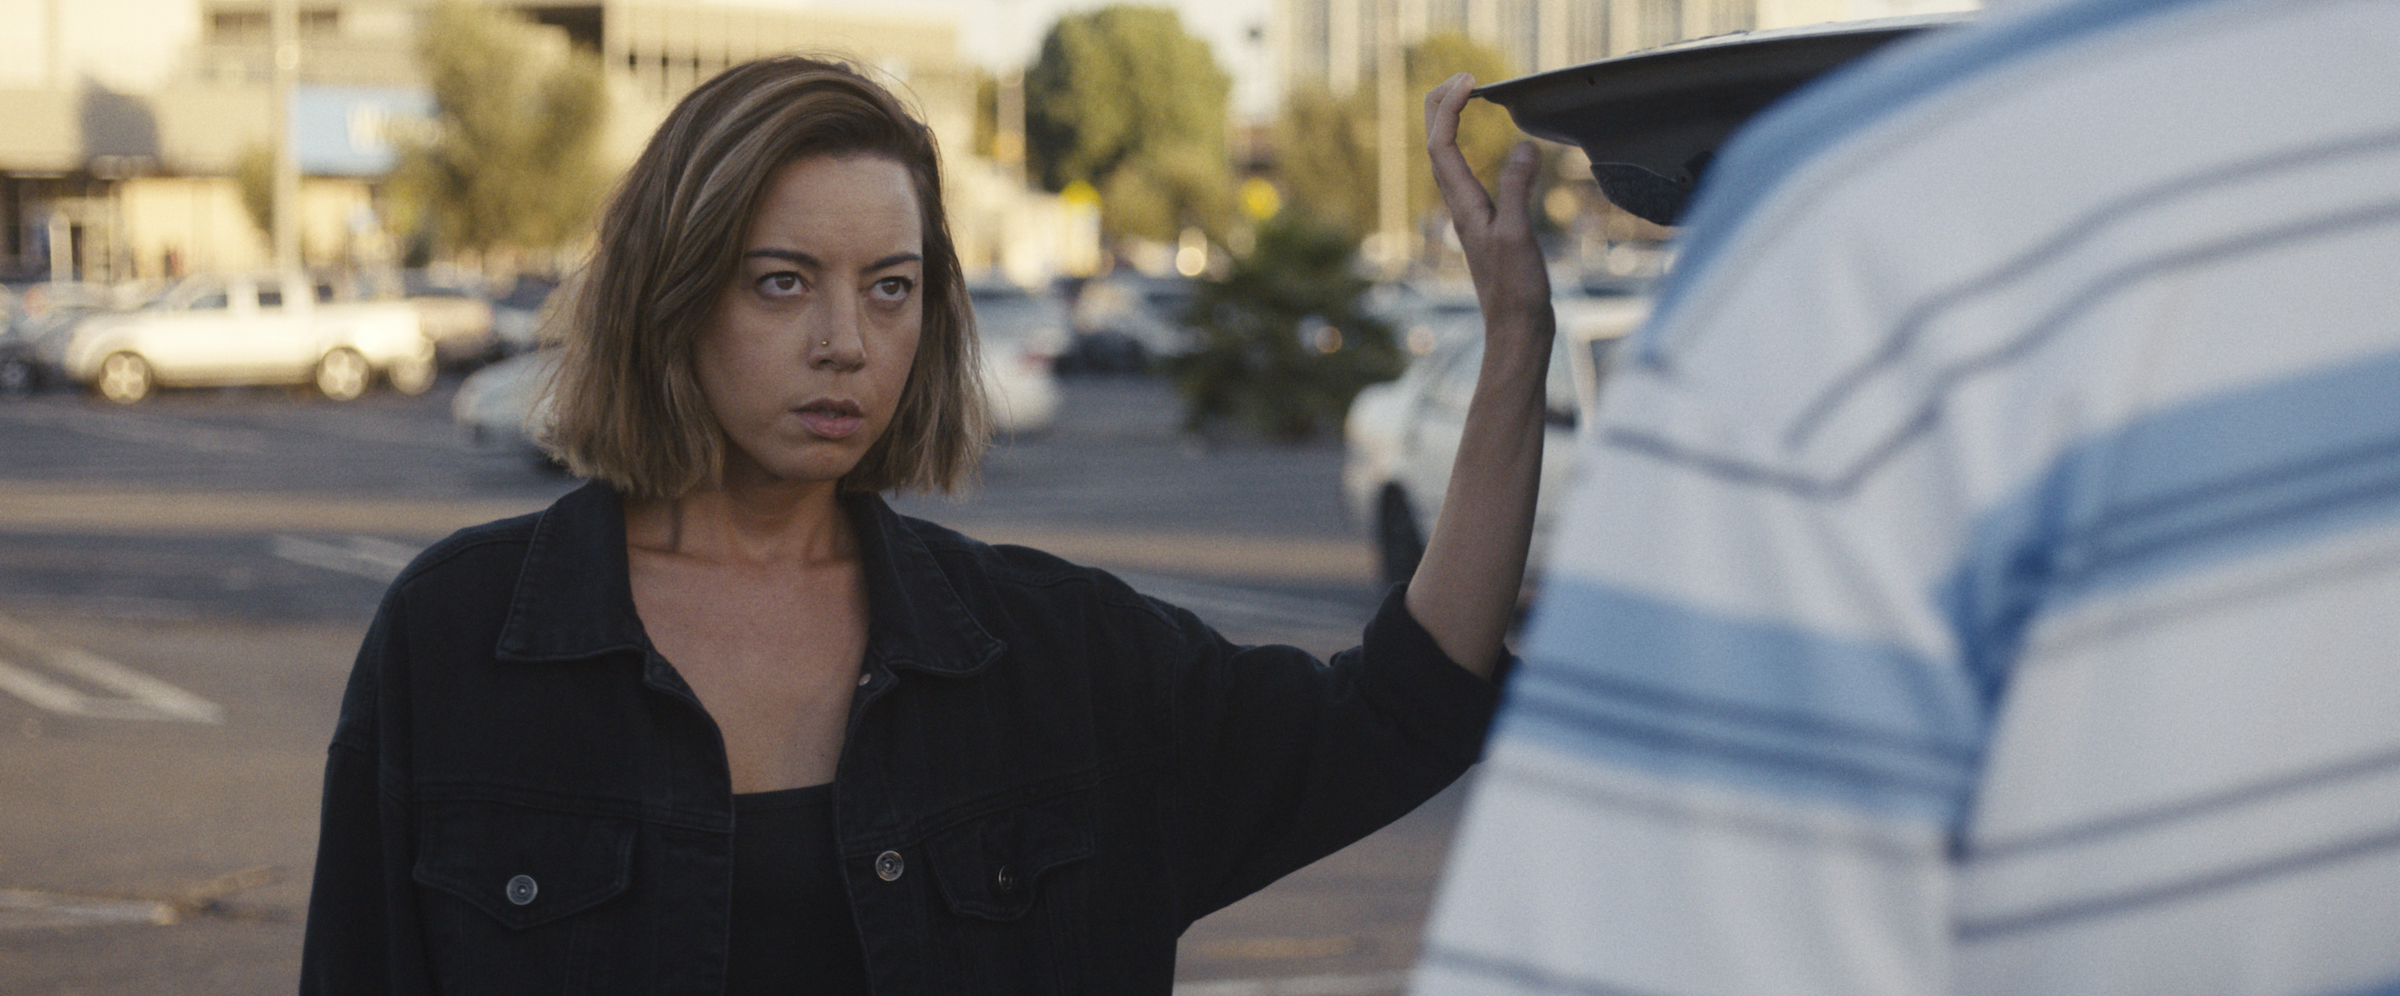 Aubrey Plaza in the new thriller 'Emily the Criminal' (Courtesy of Roadside Attractions and Vertical Entertainment)